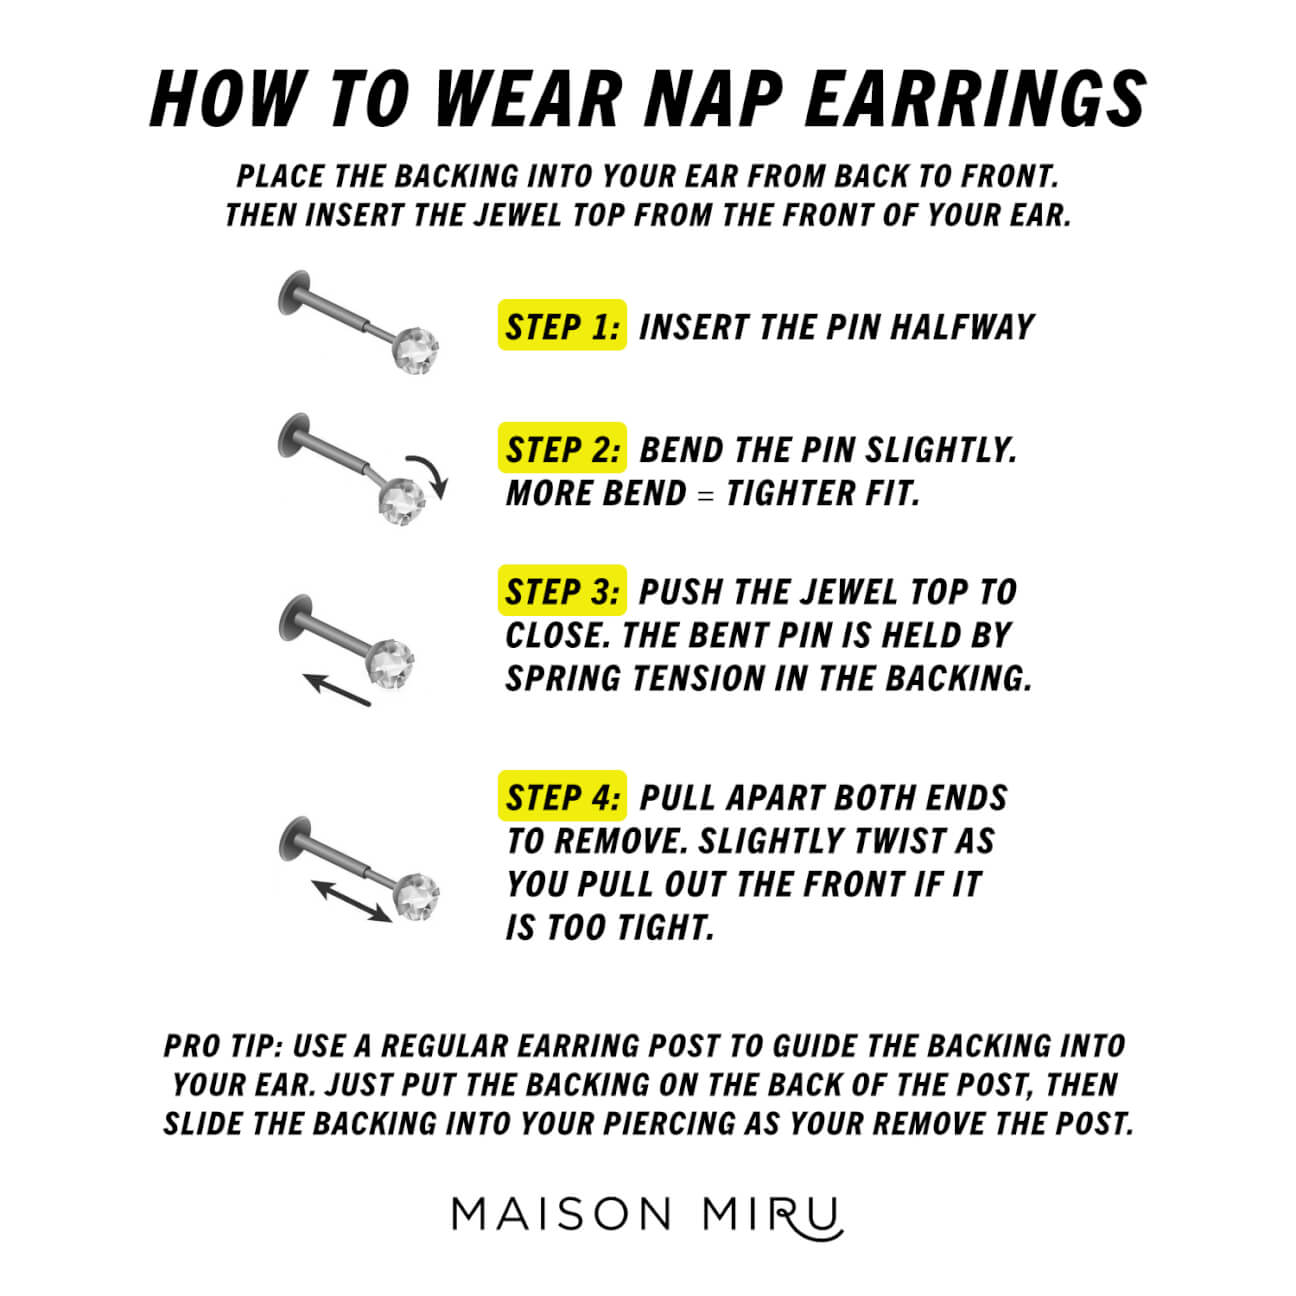 How to Wear the Gaia Nap Earrings